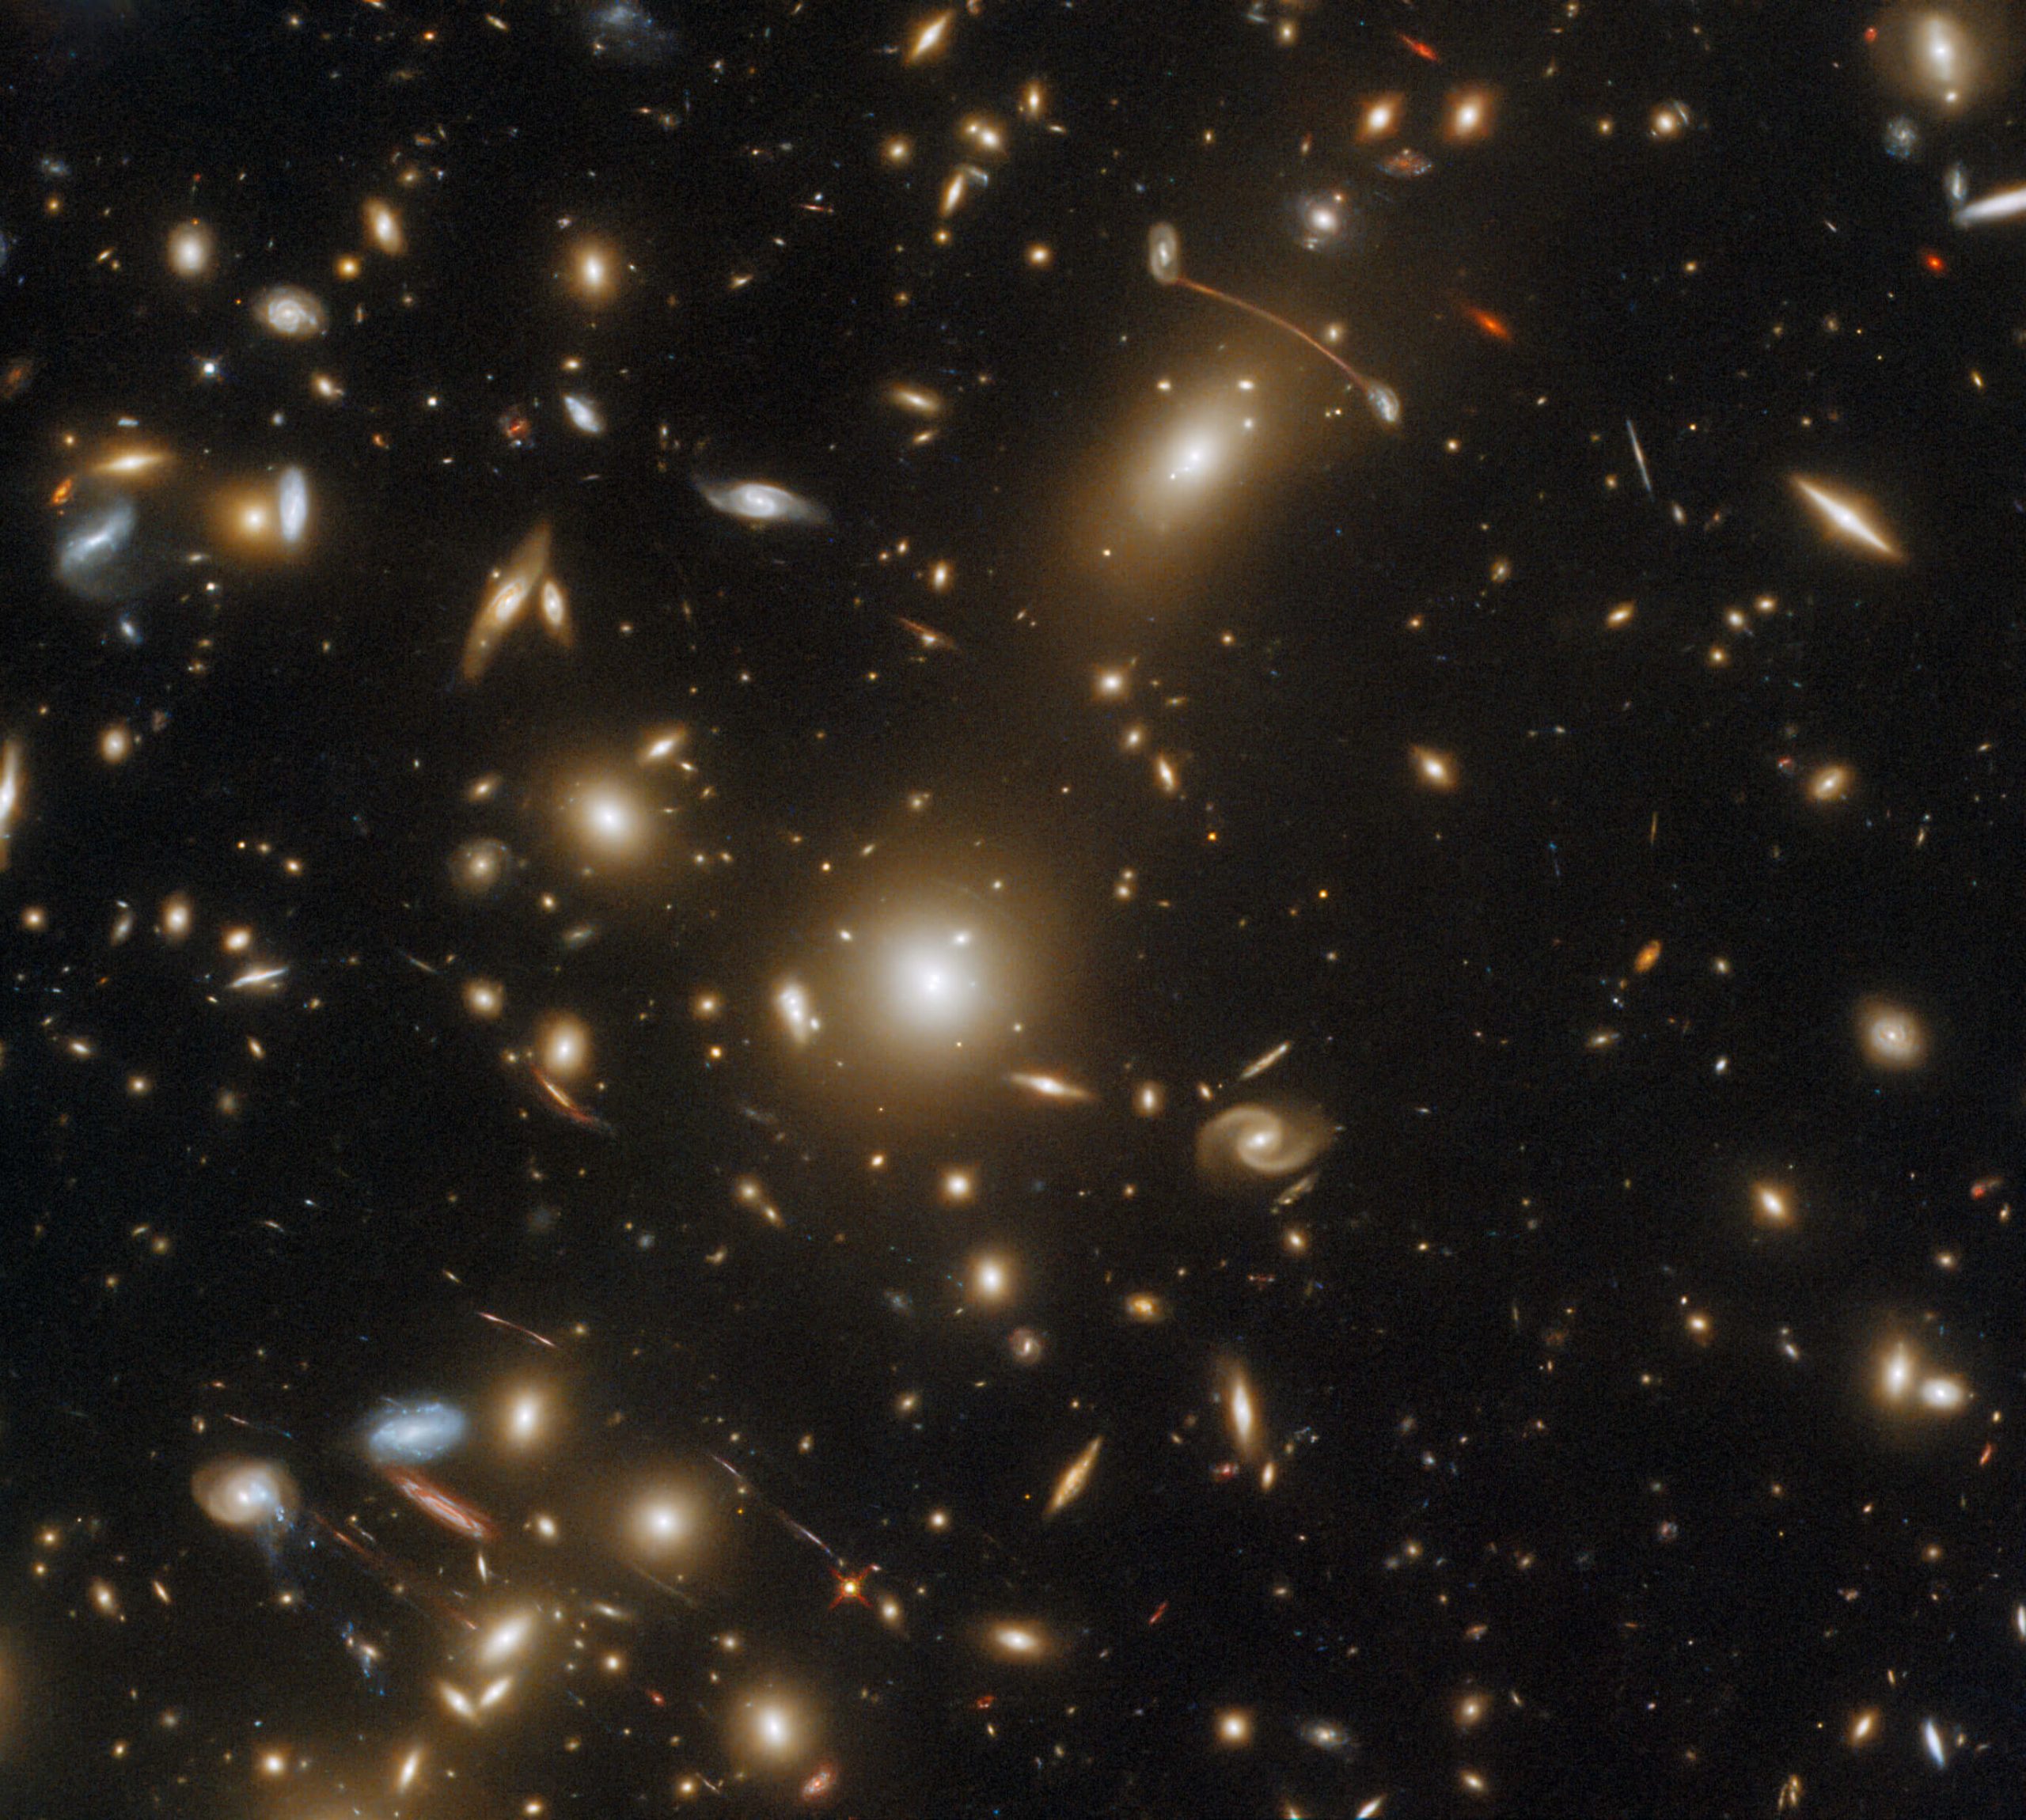 Puzzling radio signal unveils a galaxy cluster’s core